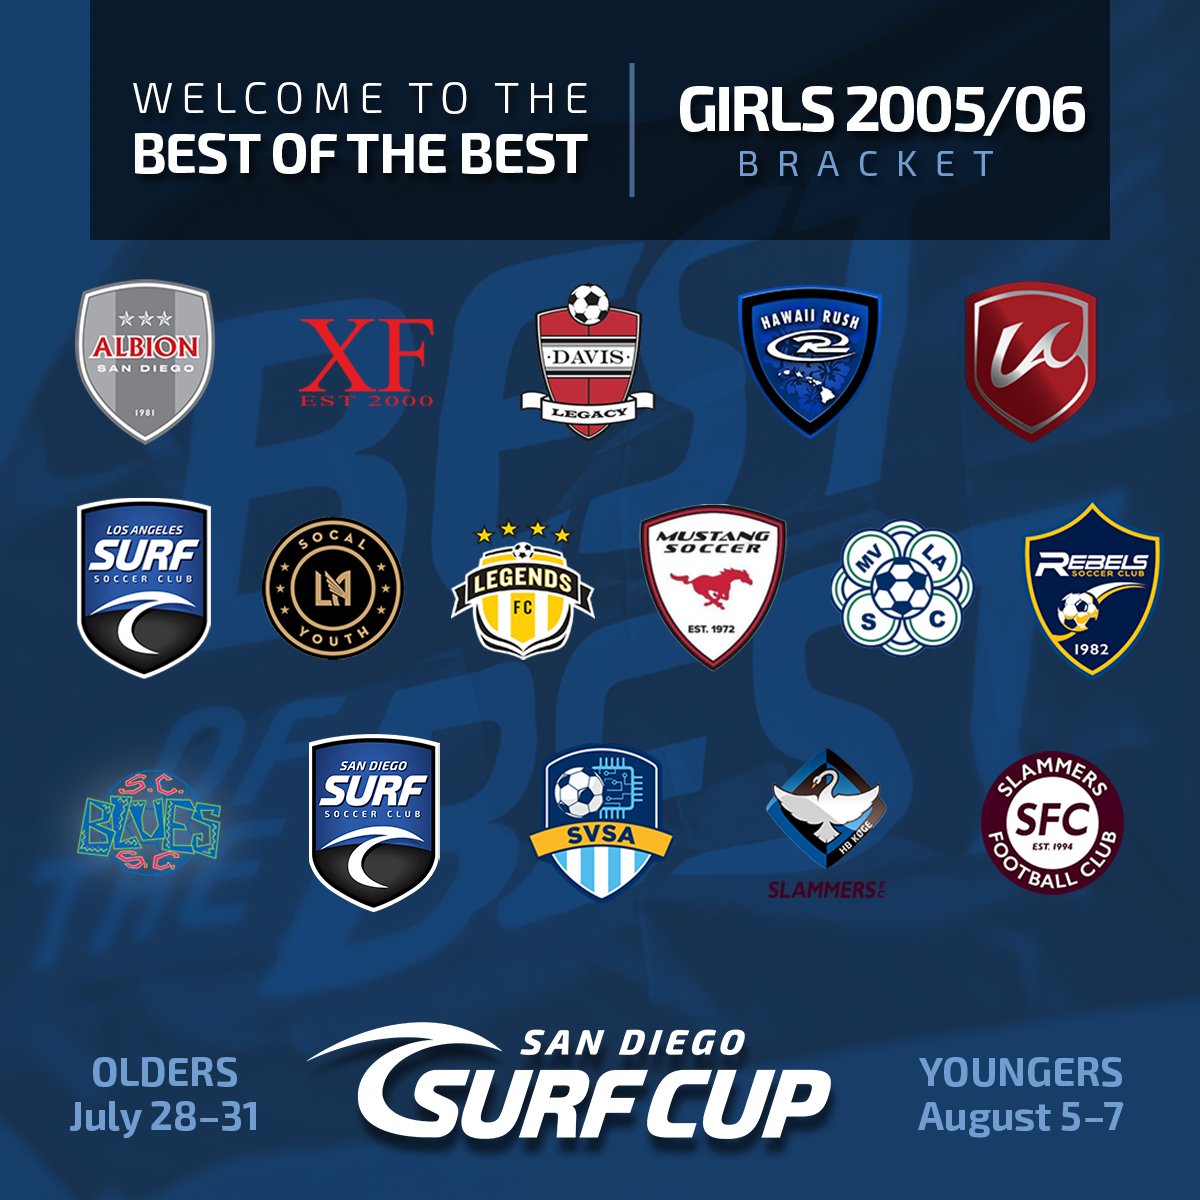 #SurfCup is thrilled to announce our 2005/06 Boys & Girls #BestOfTheBest Brackets! With EIGHT days to go, we're gearing up to host the nation's top clubs and huge matchups! We cannot wait to hand out the 🏆 to the #BestOfTheBest!